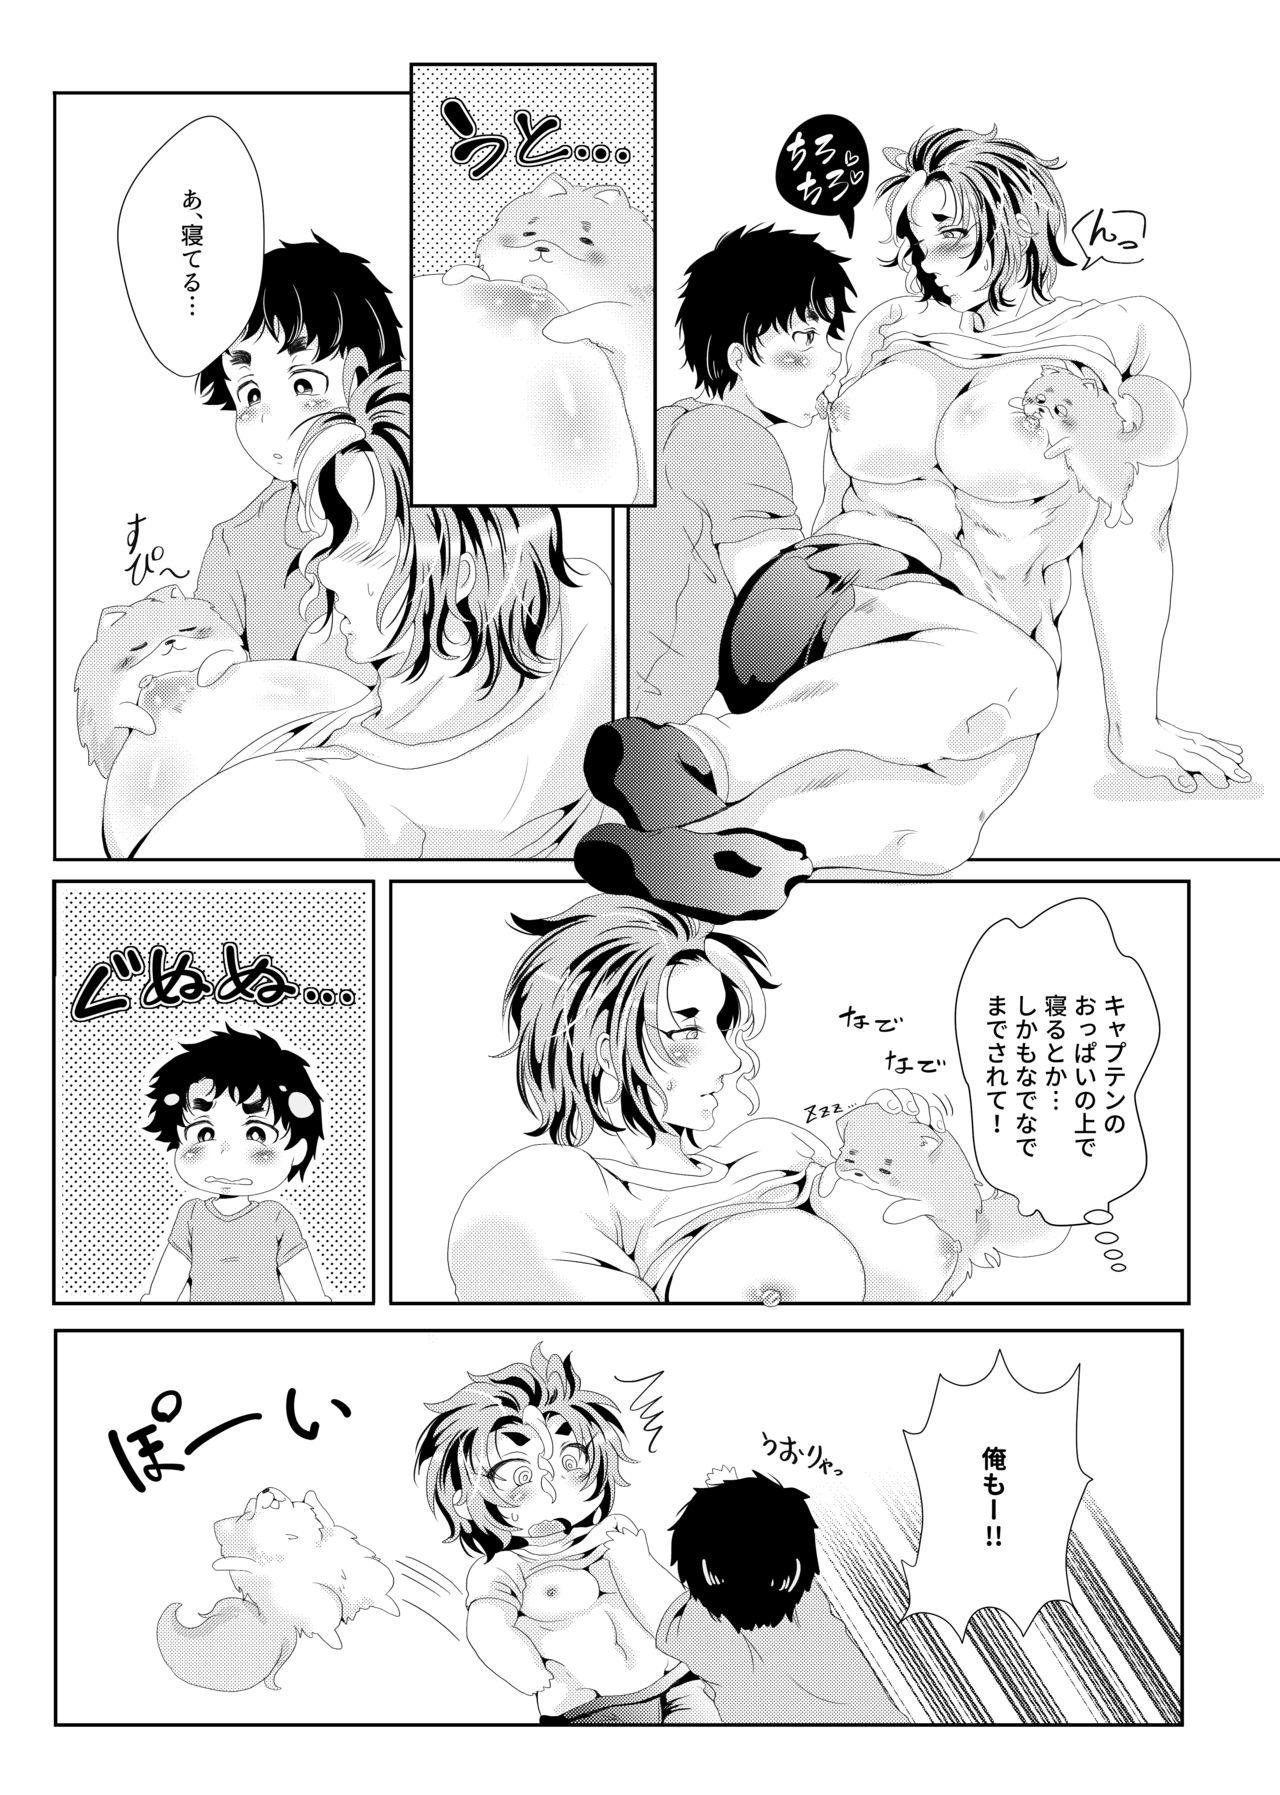 Domina Captain no Bonyuu de One Chance o Nerau - Aiming at One Chance with Captain's Breast Milk - All out Cutie - Page 11